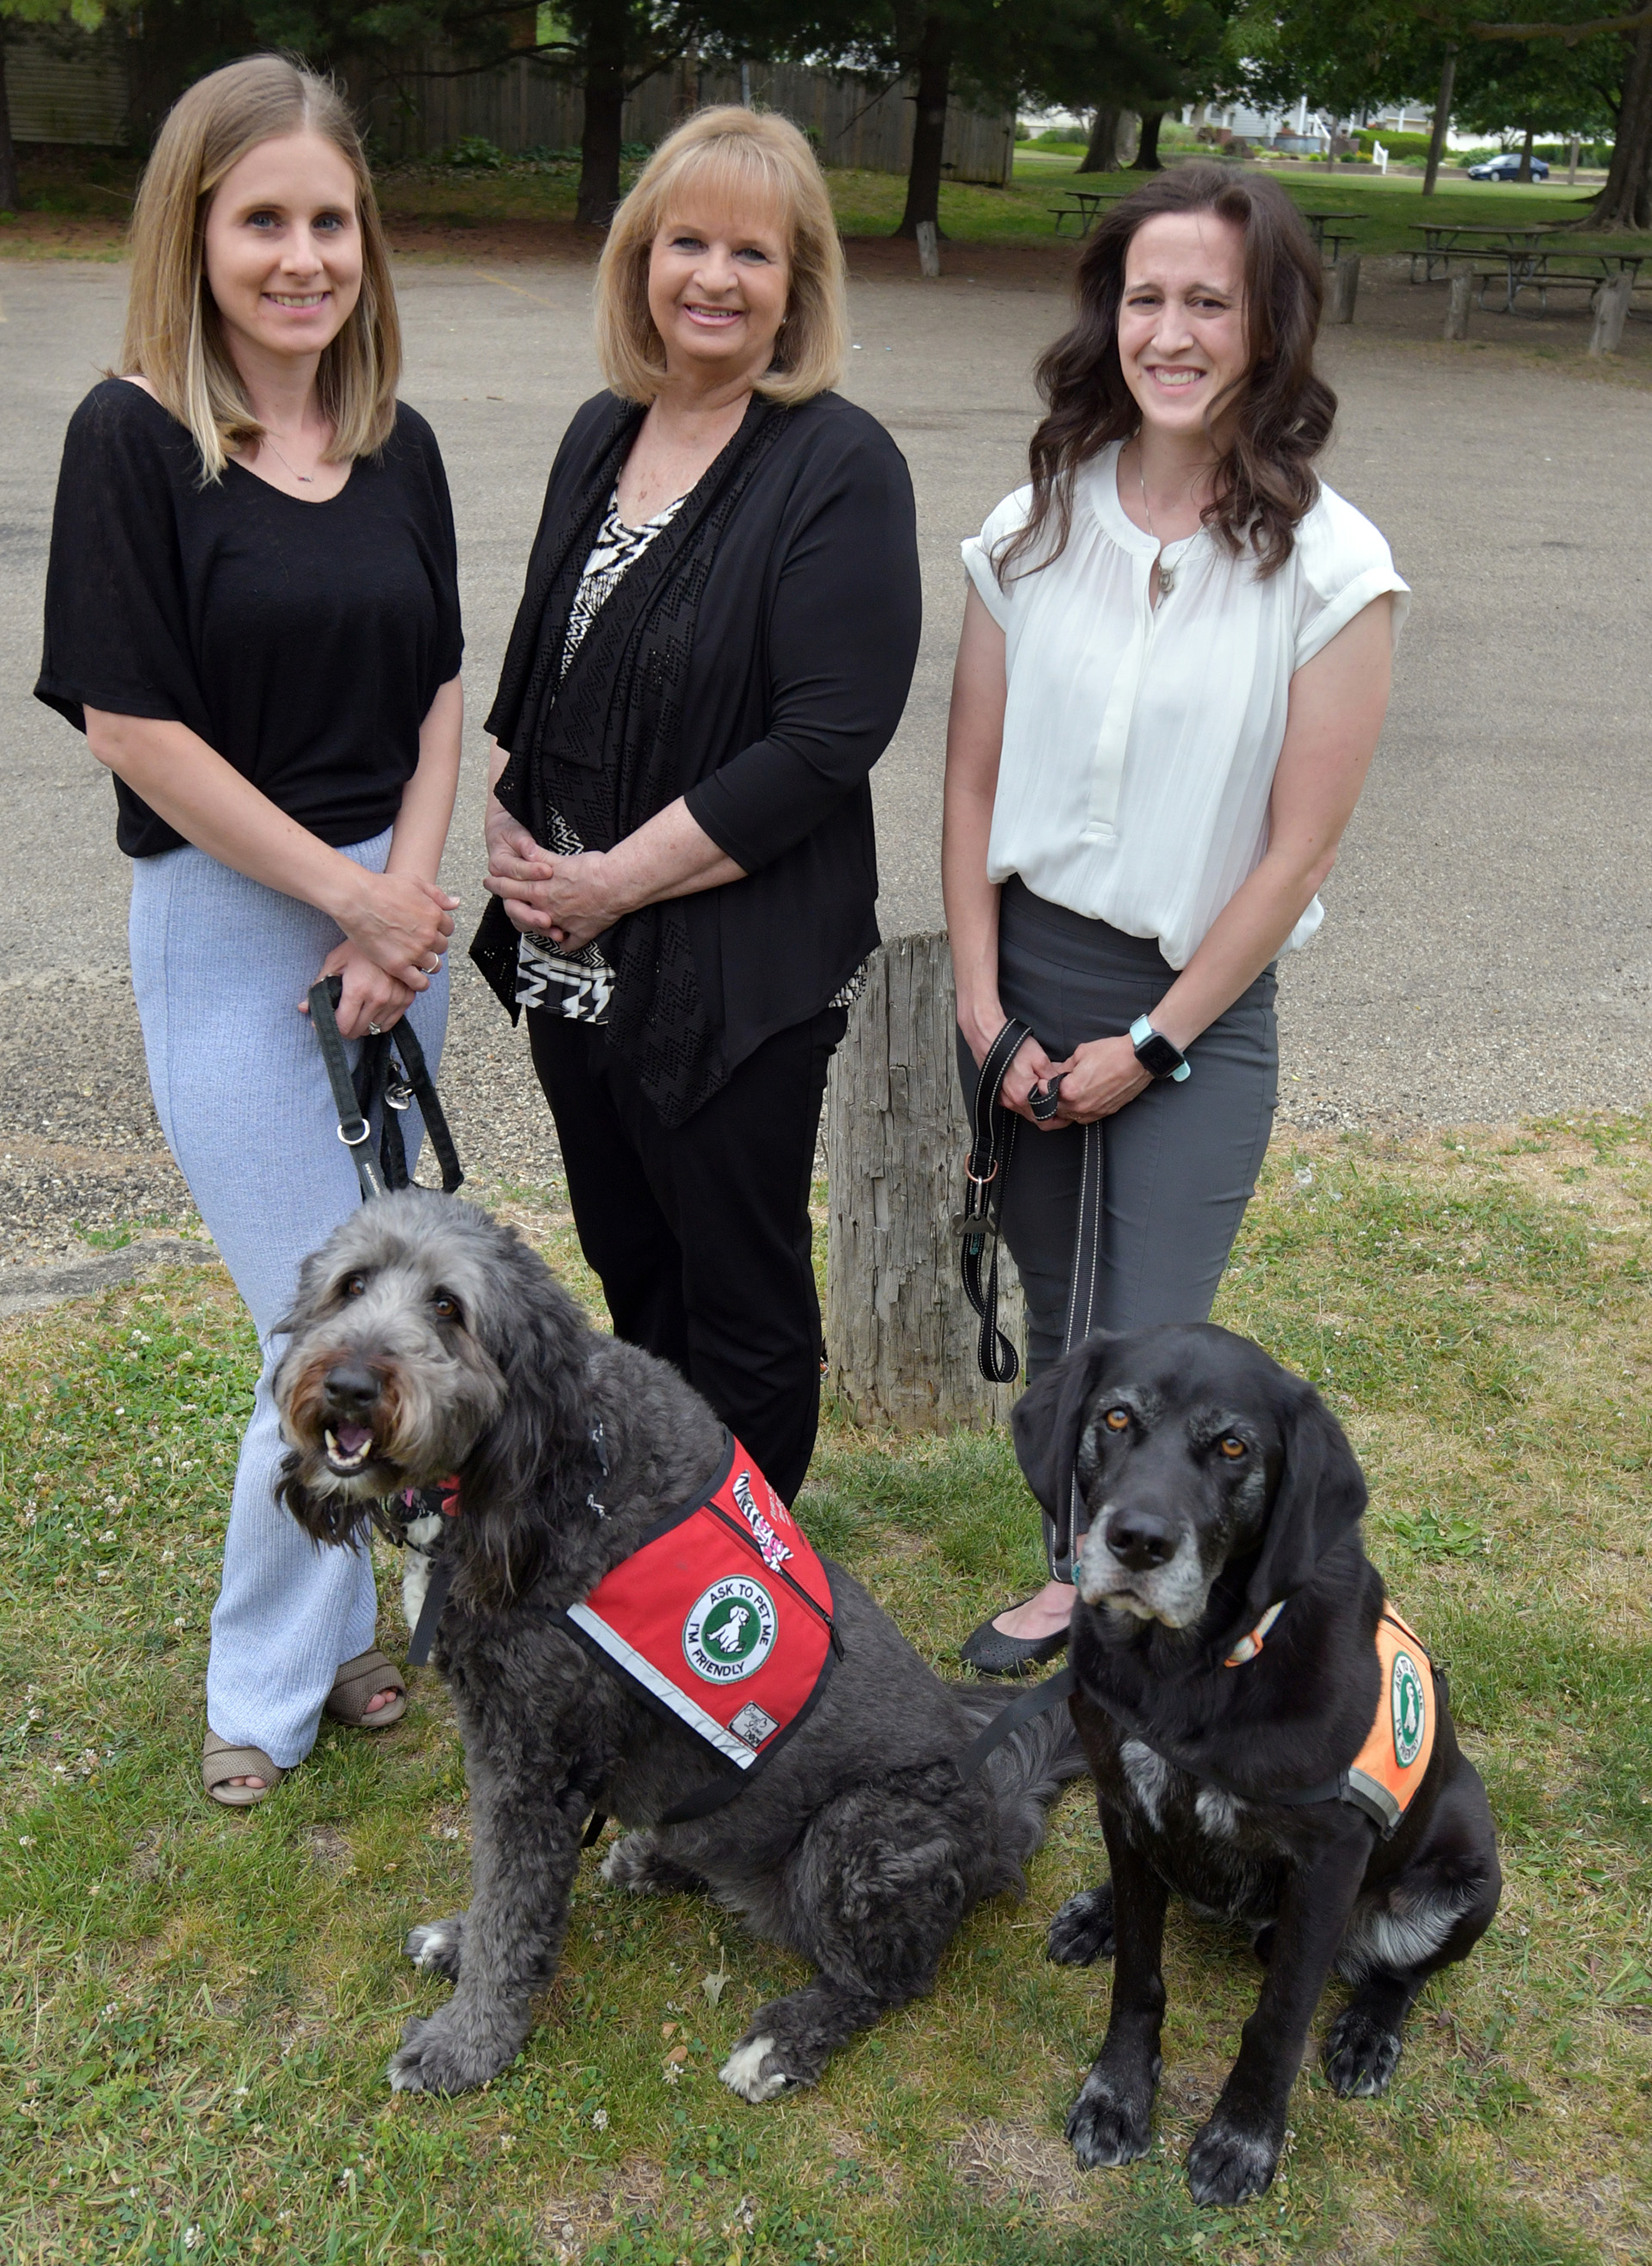 Left to right, Michelle Yuen with facility dog Lucie, Donna Kosner, and Brandy Weyers with Jarvis. These three women are the founders of Paws Giving Independence